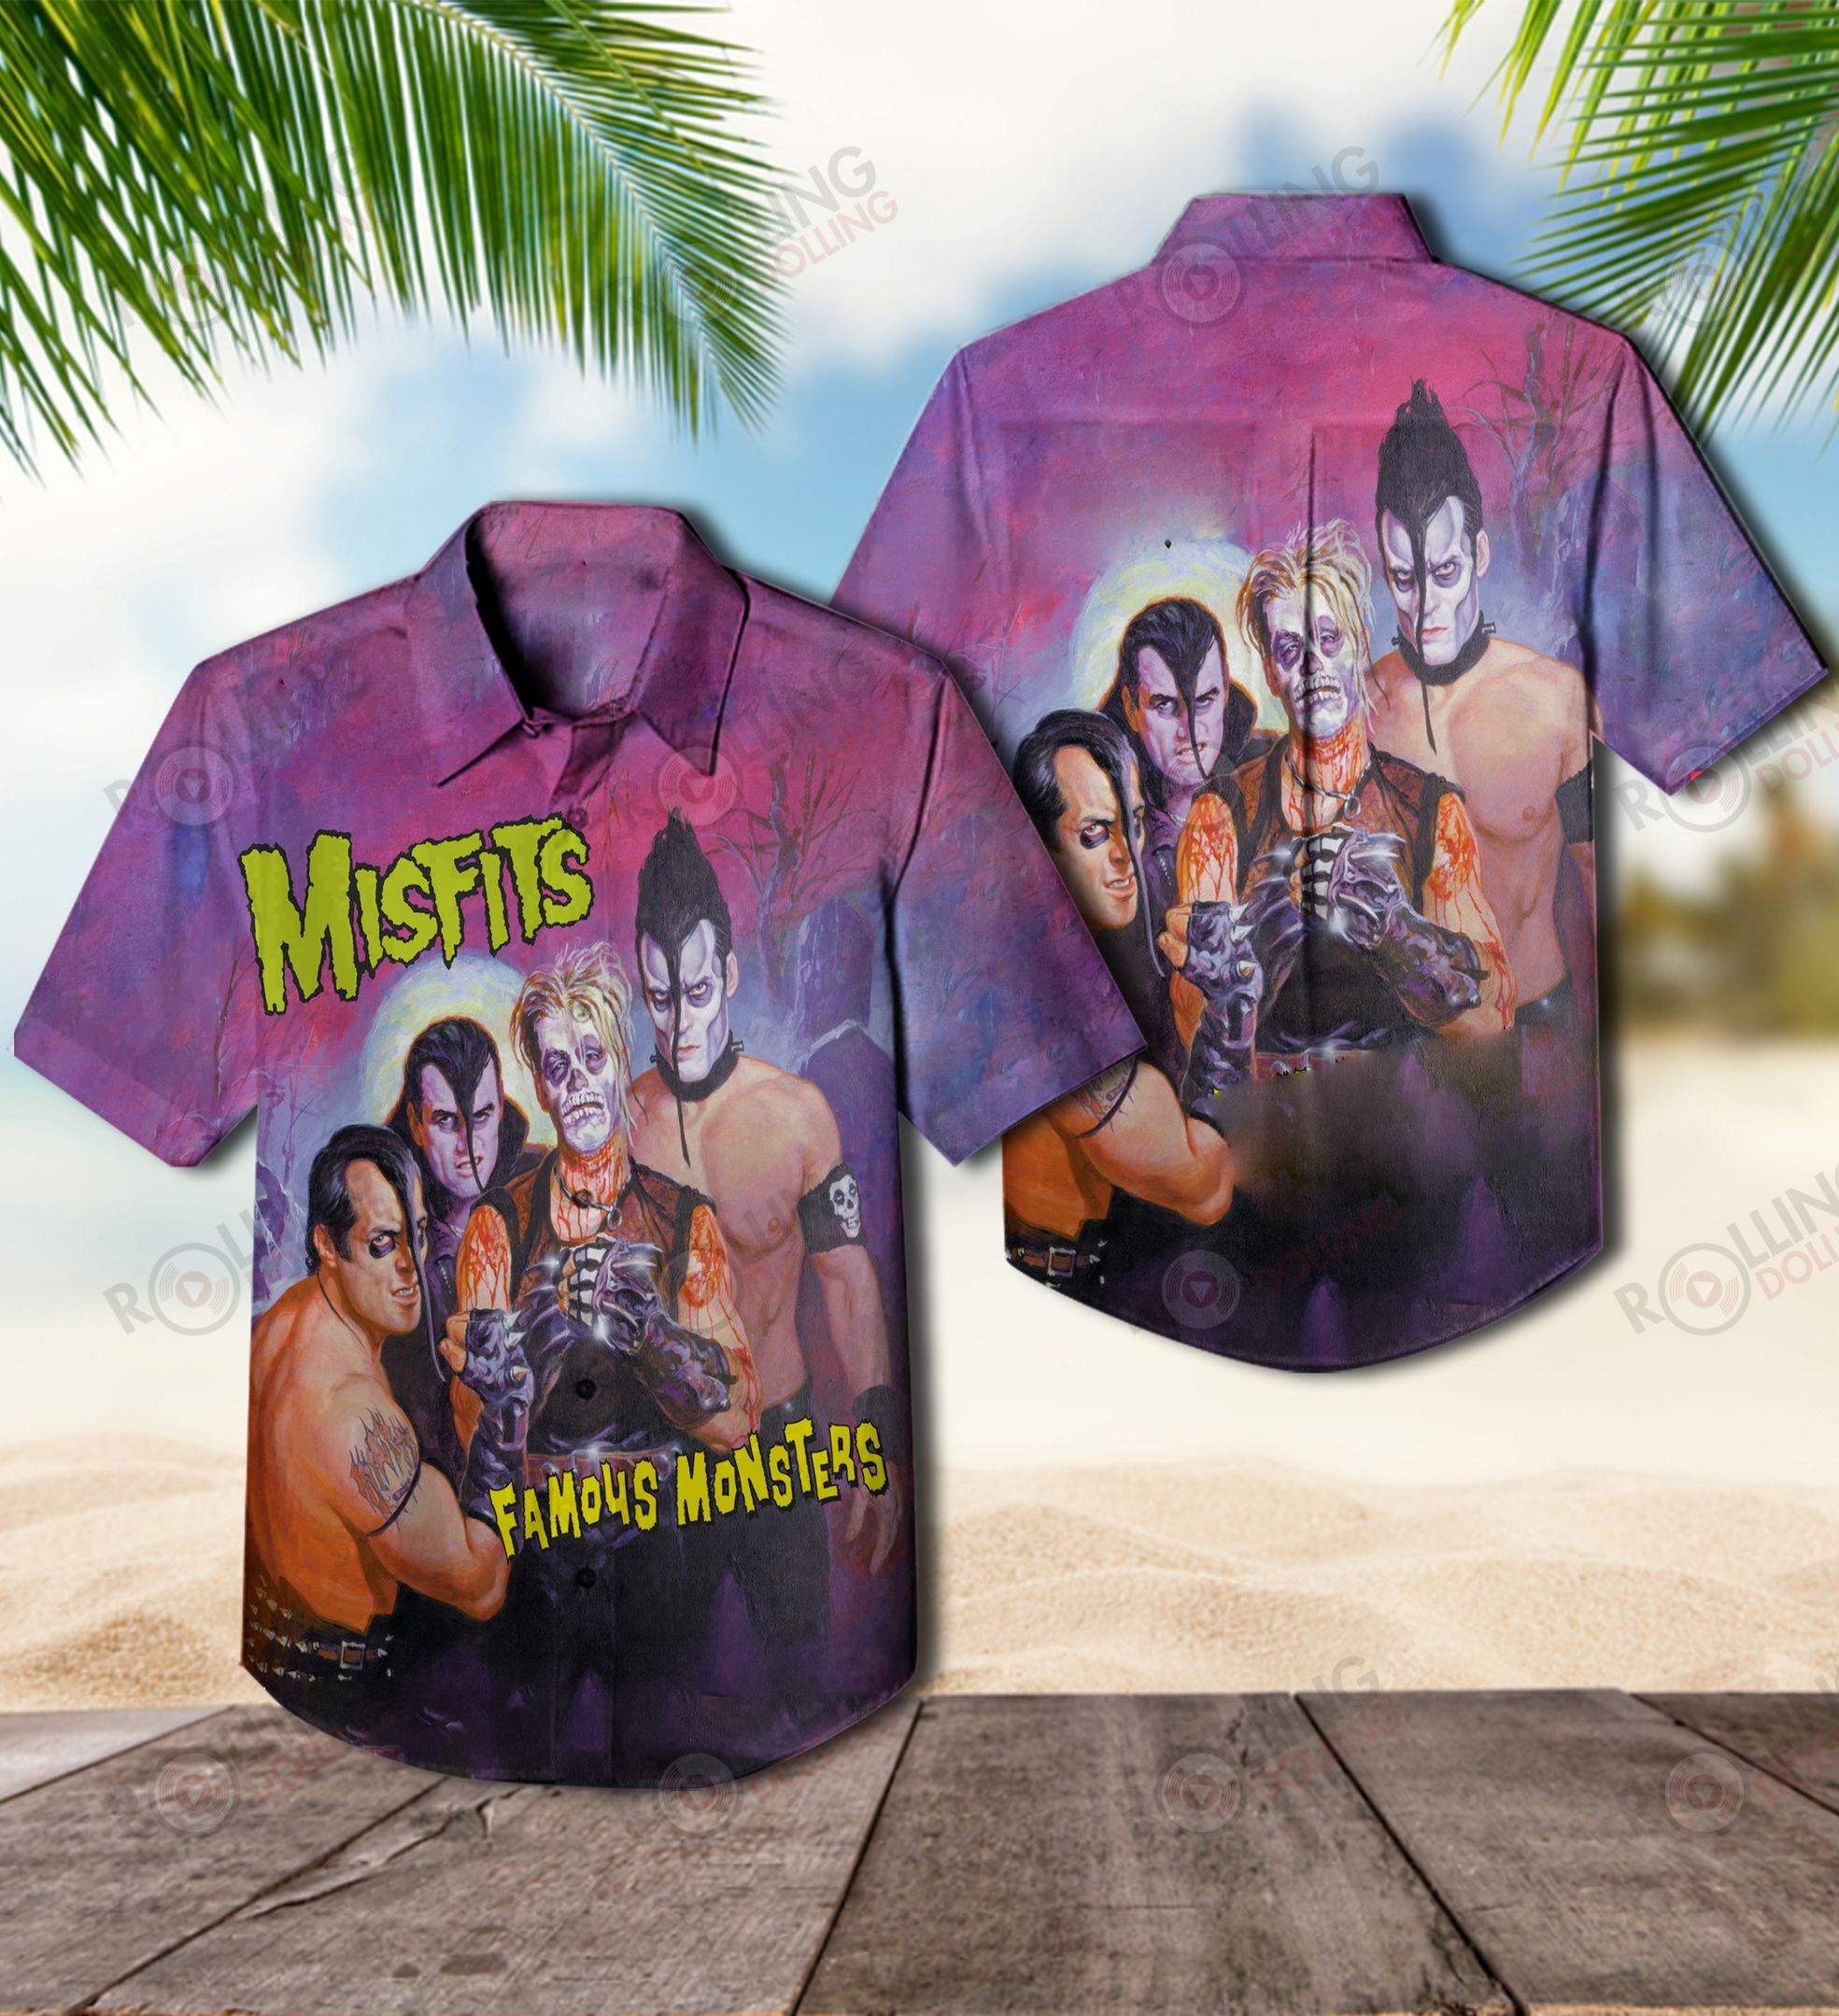 The Hawaiian Shirt is a popular shirt that is worn by Rock band fans 31